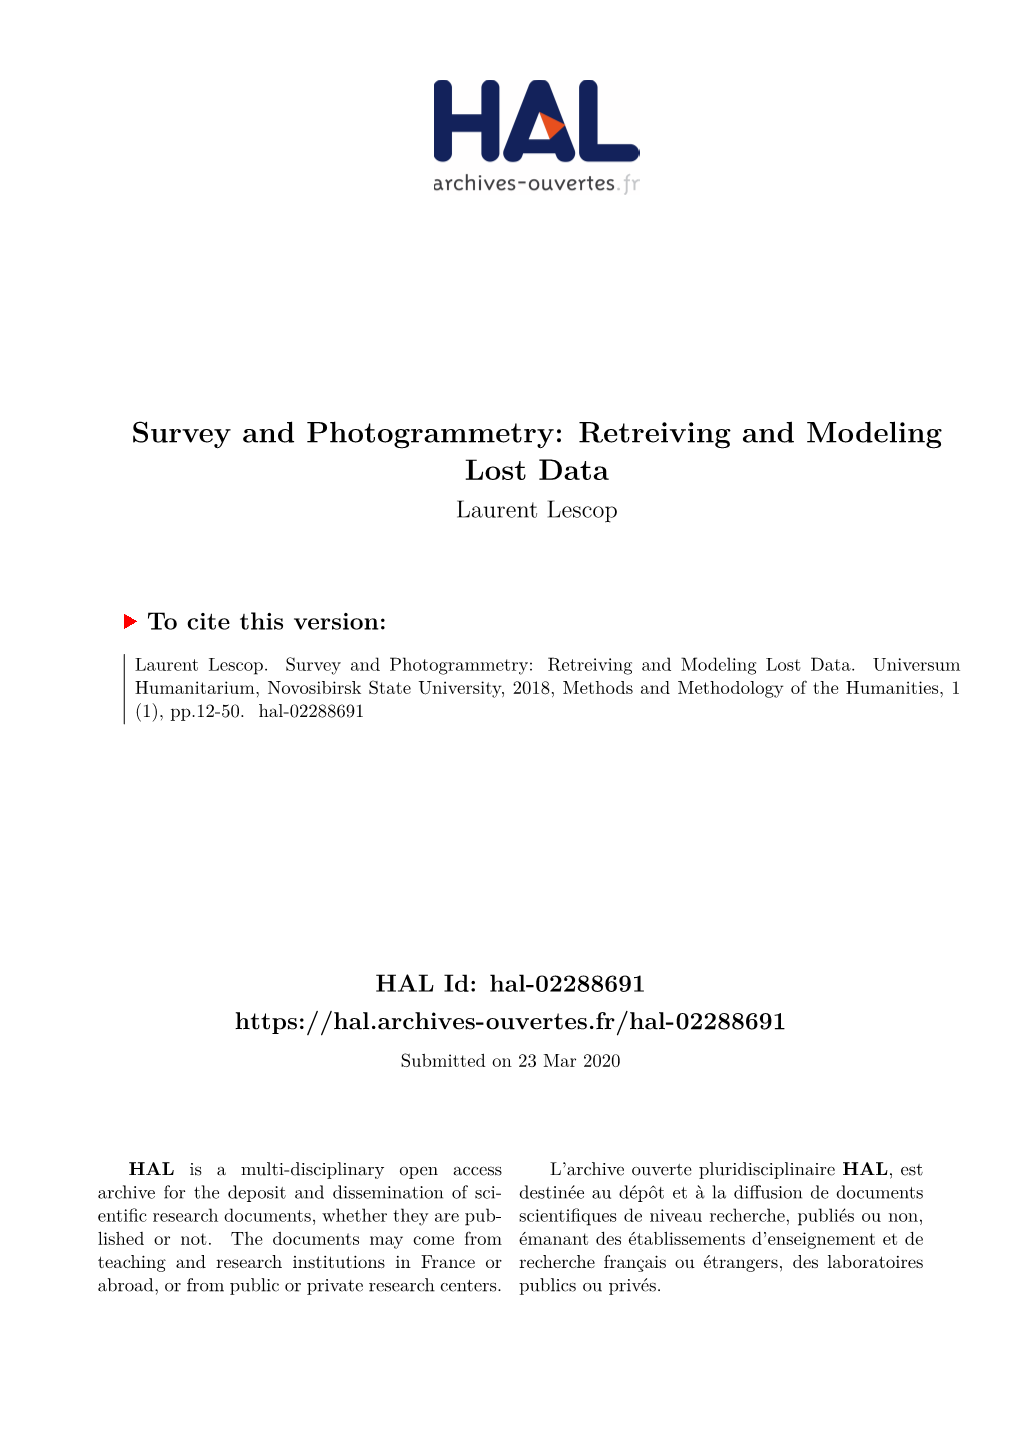 Survey and Photogrammetry: Retreiving and Modeling Lost Data Laurent Lescop